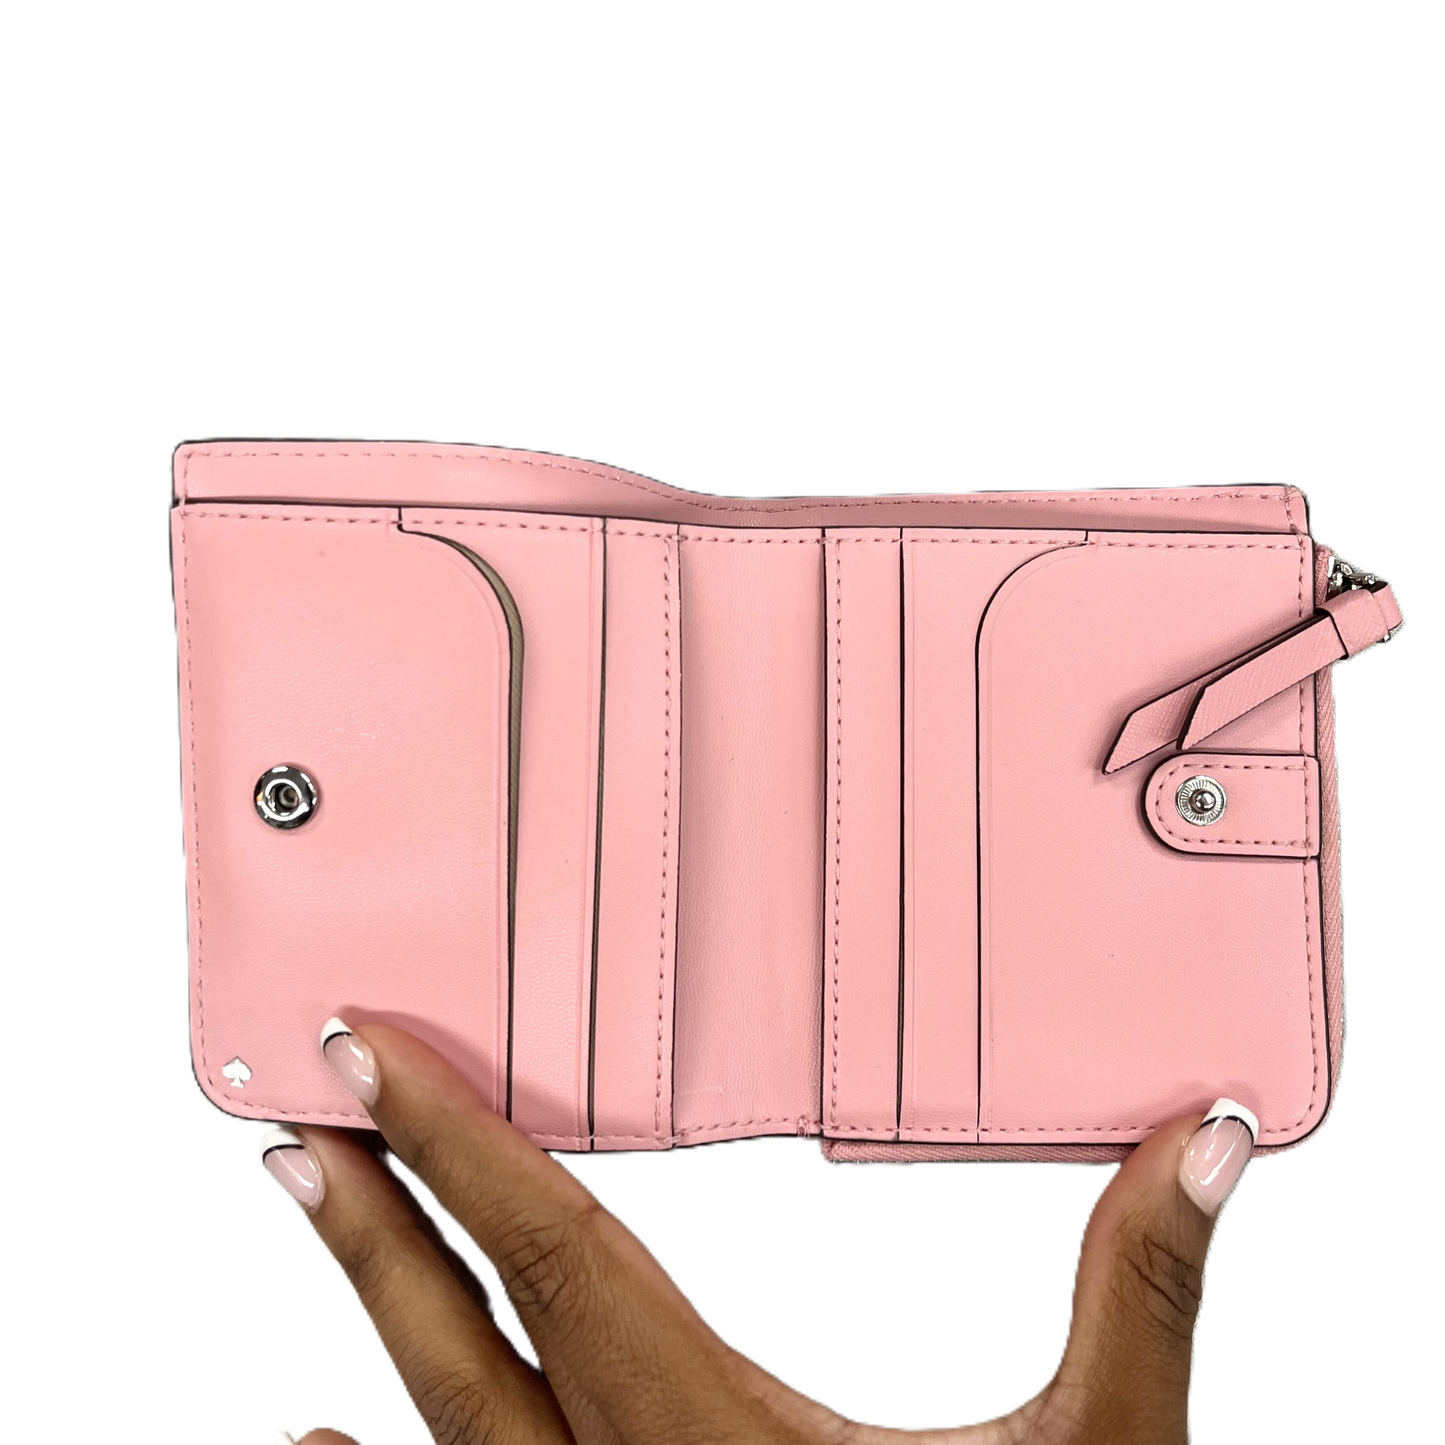 Wallet Designer By Kate Spade, Size: Small